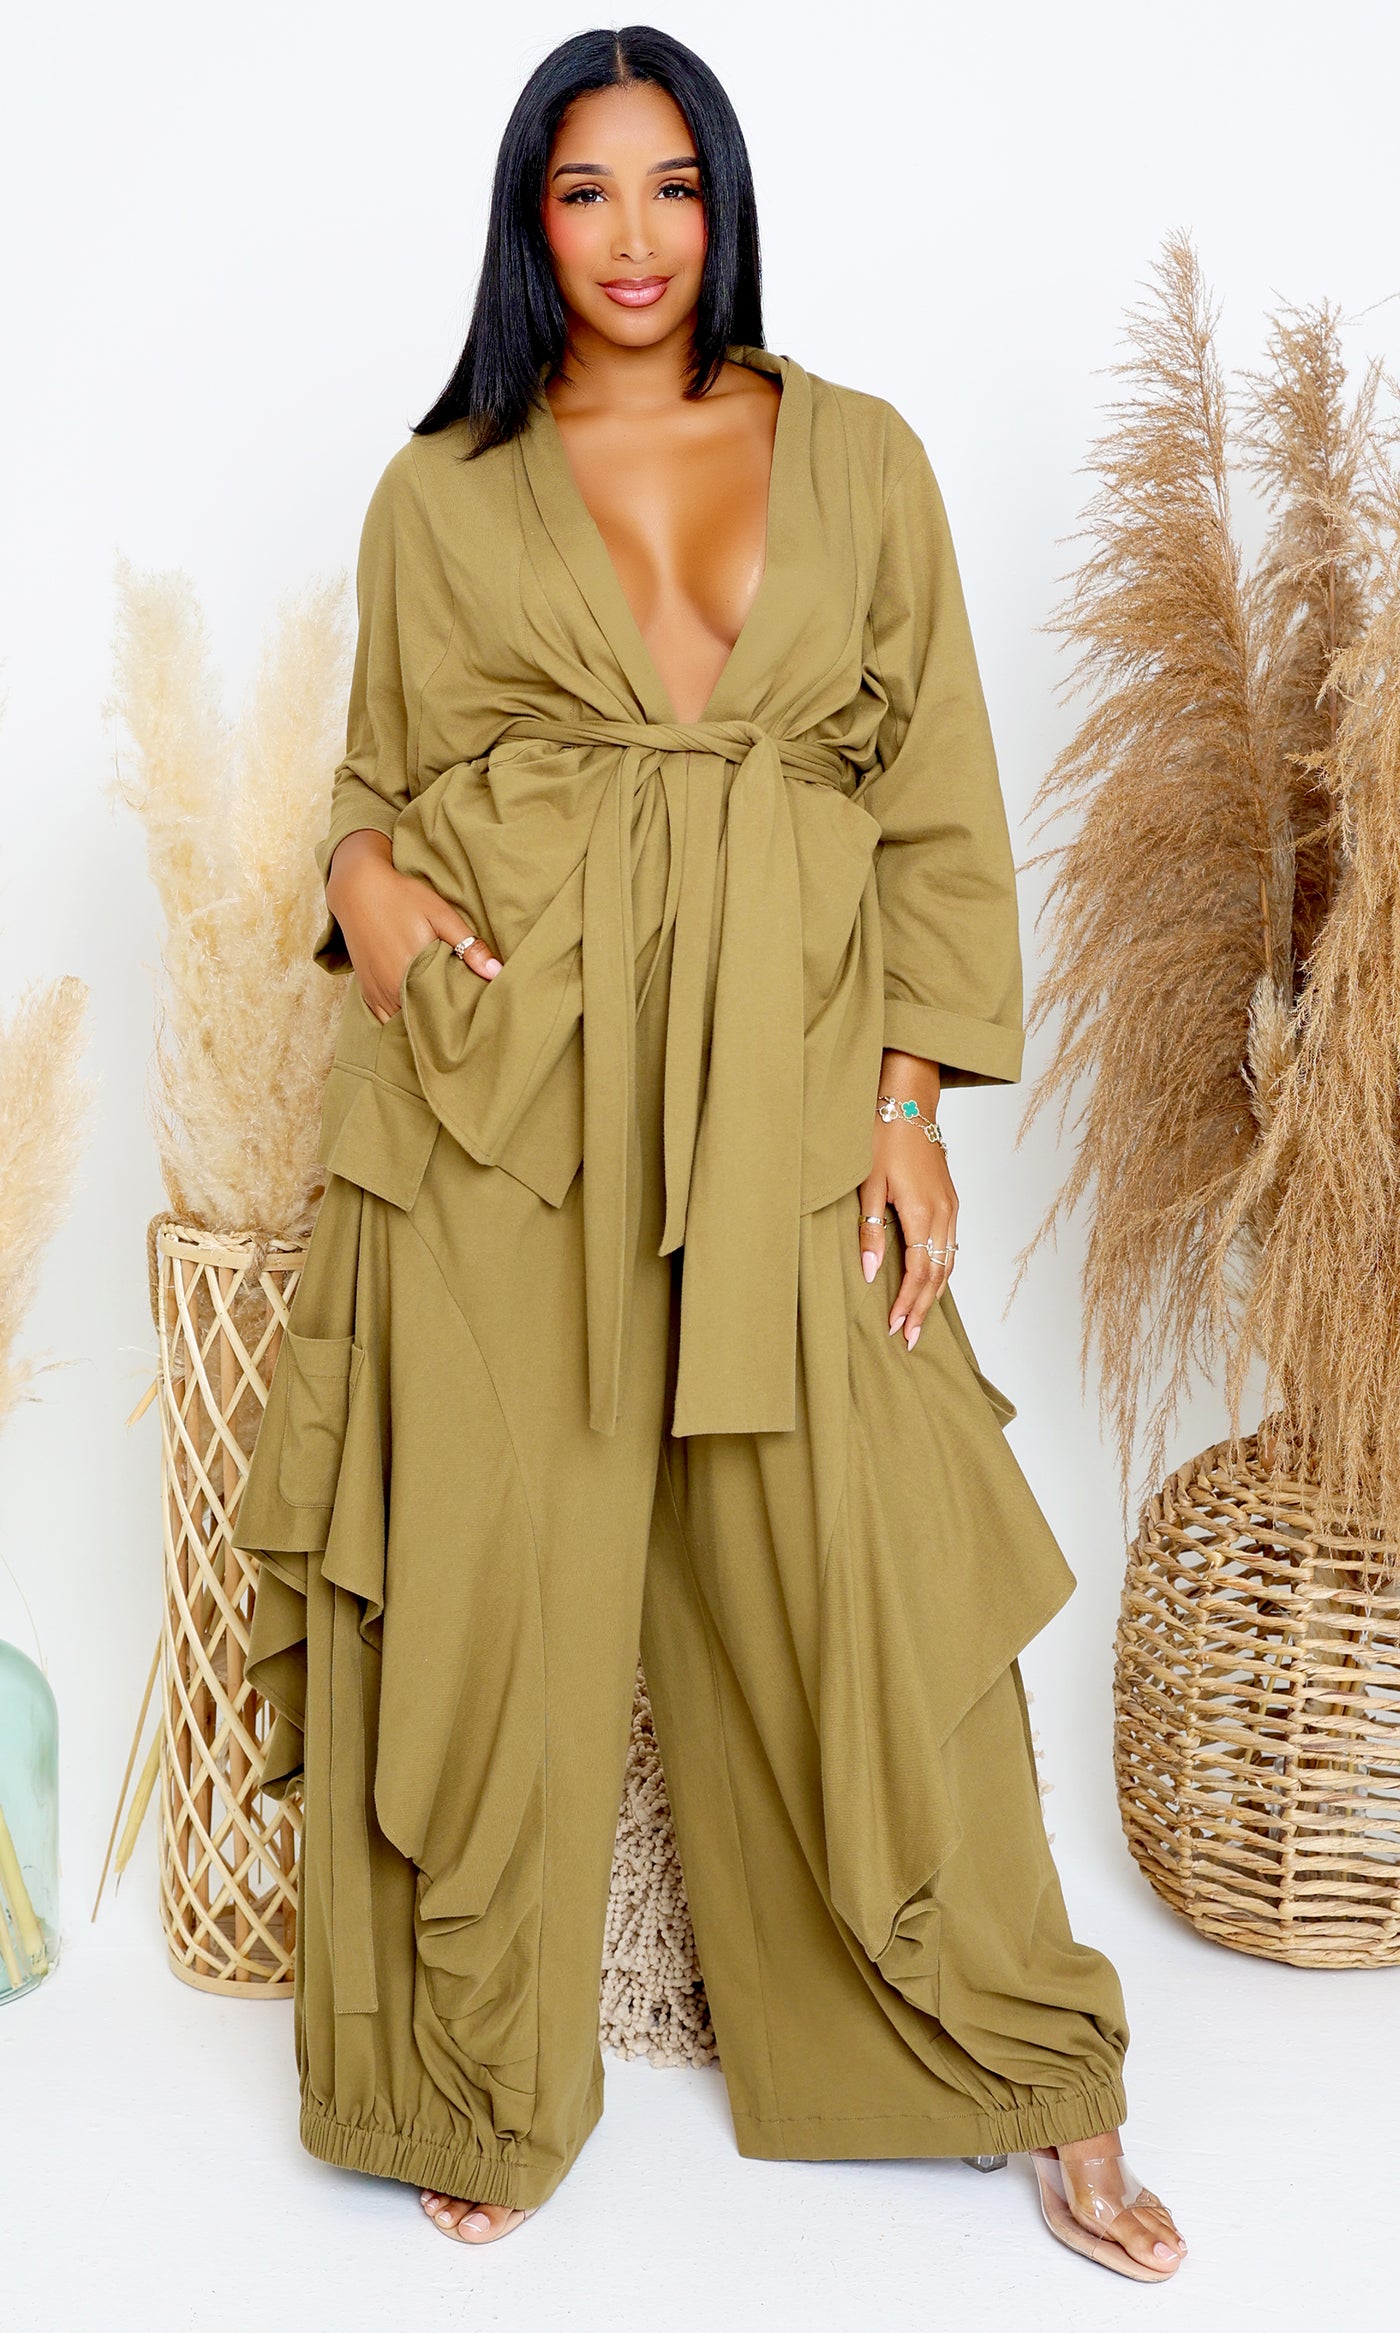 Luxury | Jersey Cardigan Set - Olive PREORDER Ships End August